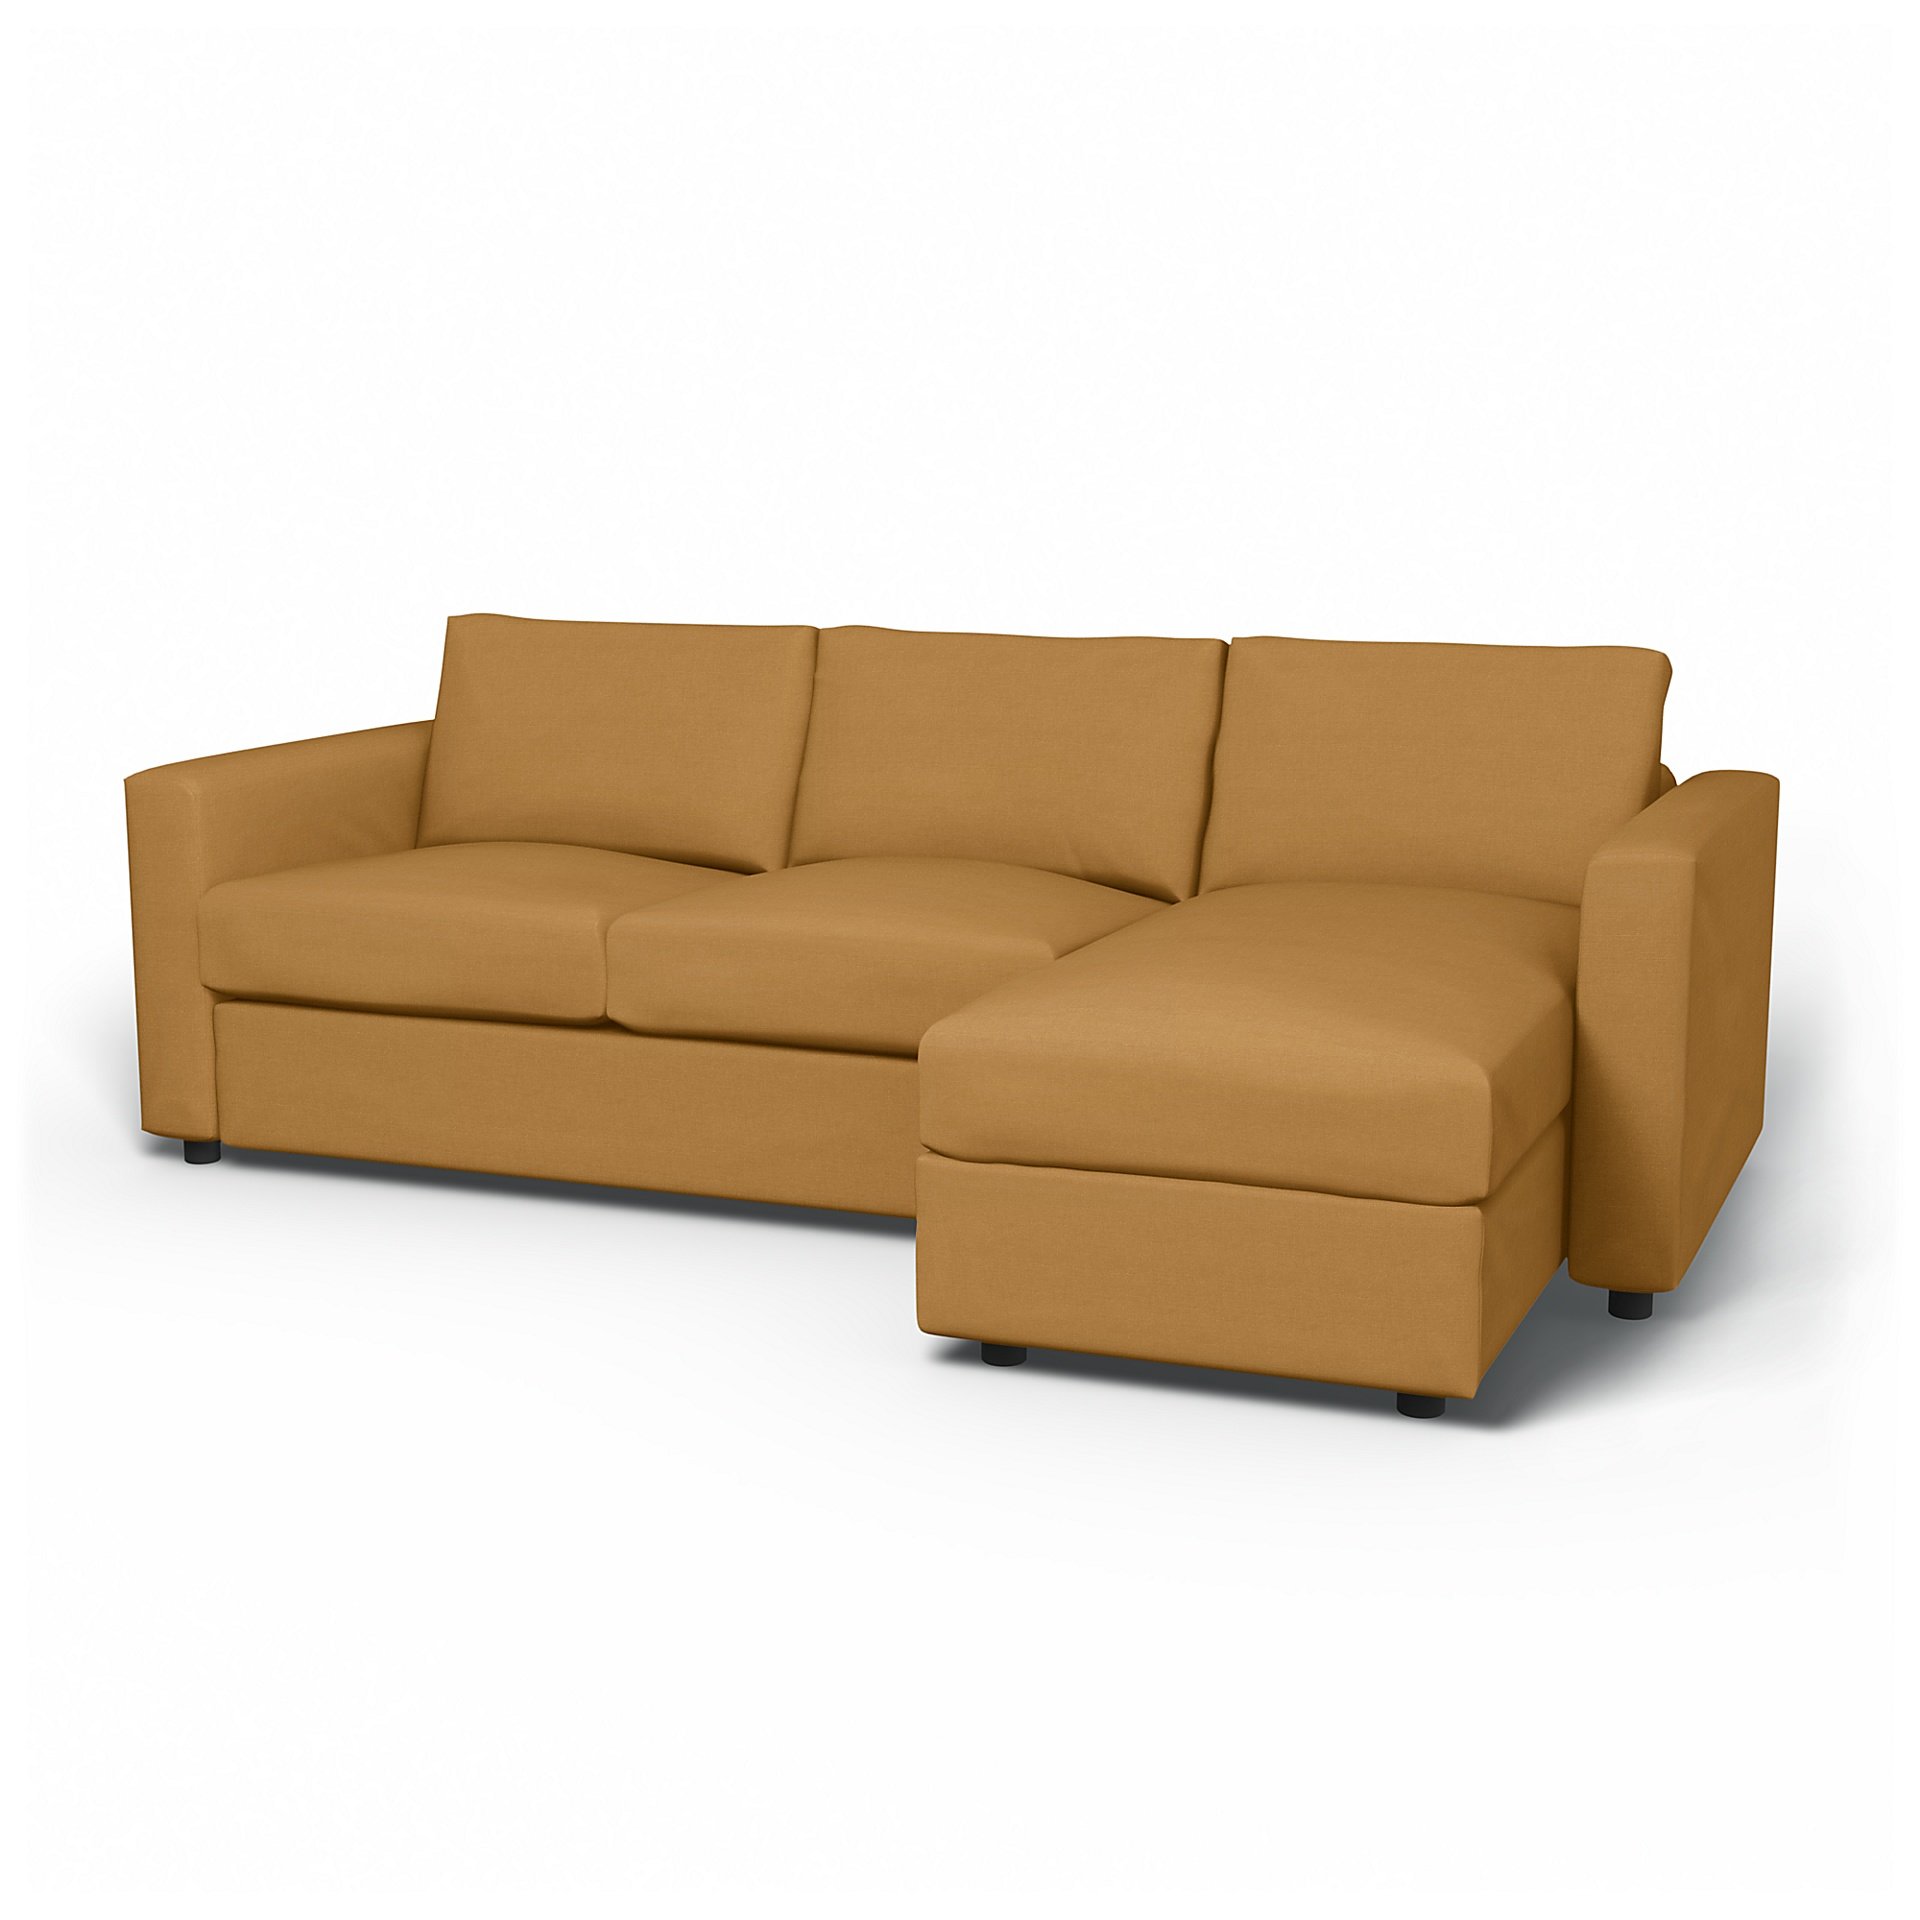 IKEA - Vimle 2 Seater Sofa with Chaise Cover, Mustard, Linen - Bemz